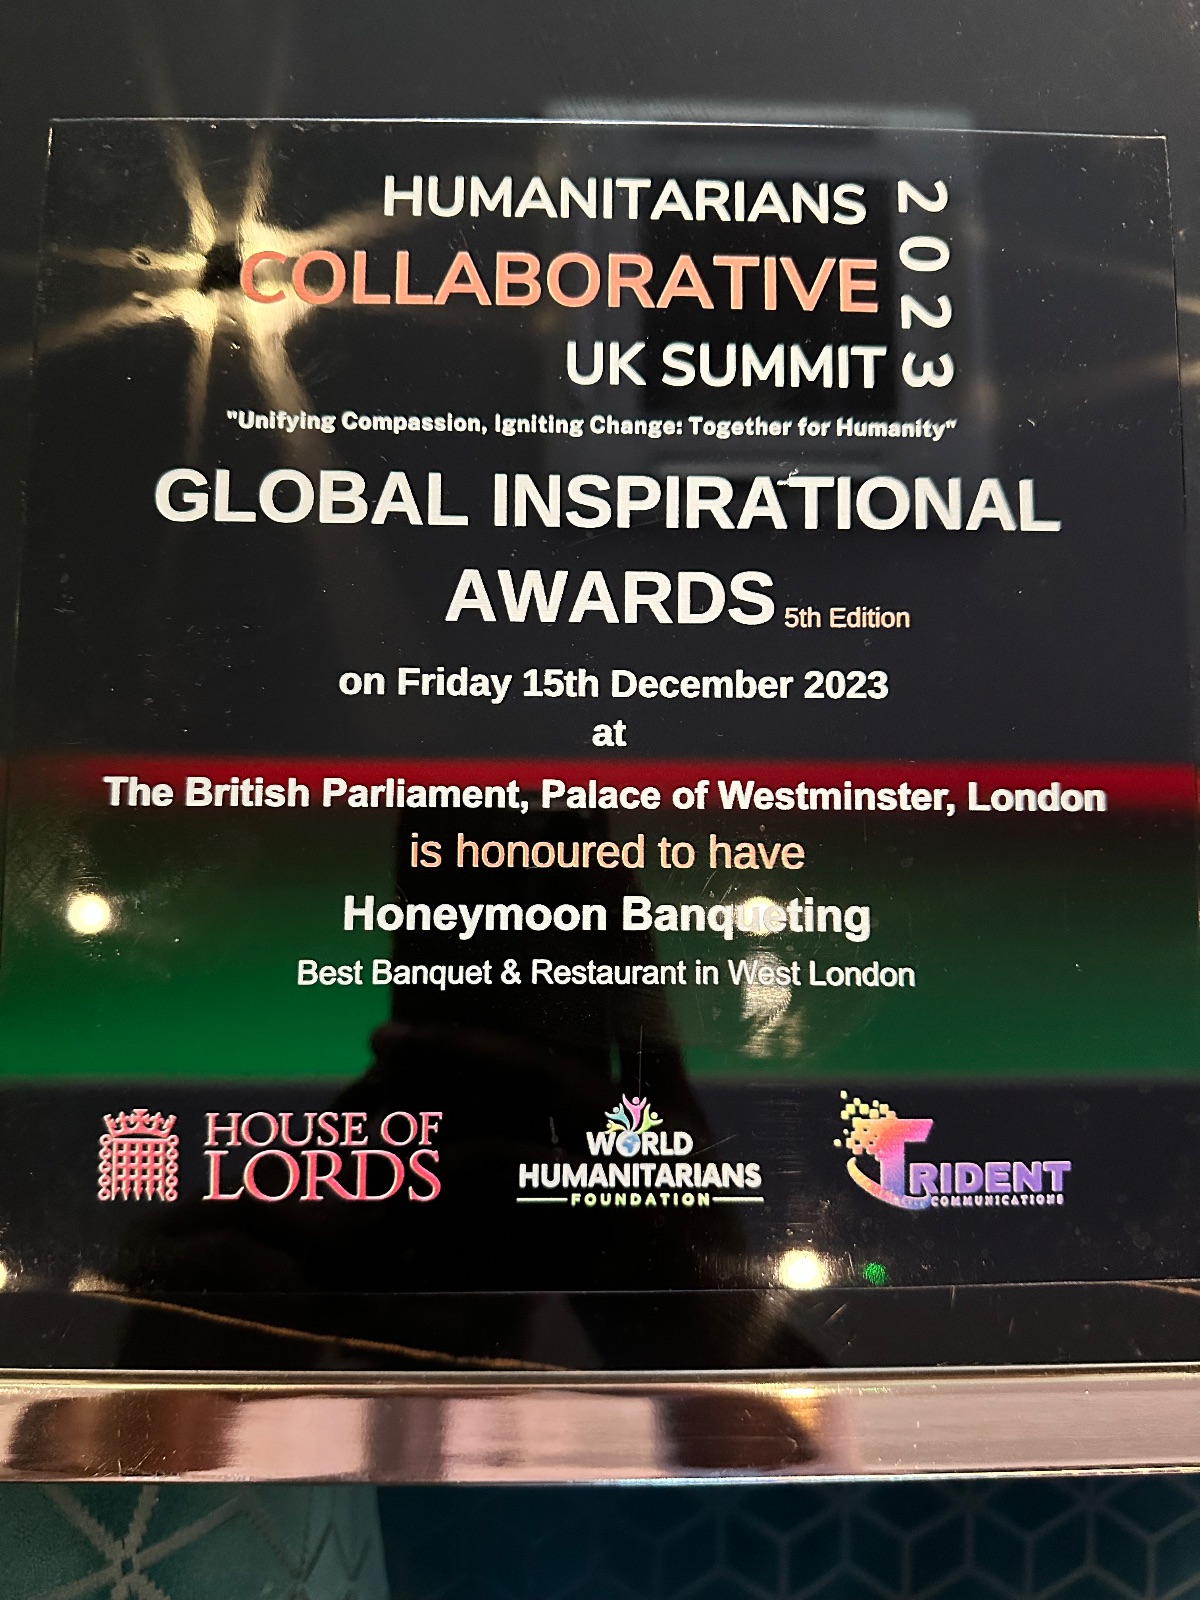 Presented this award in House Of Lord London 